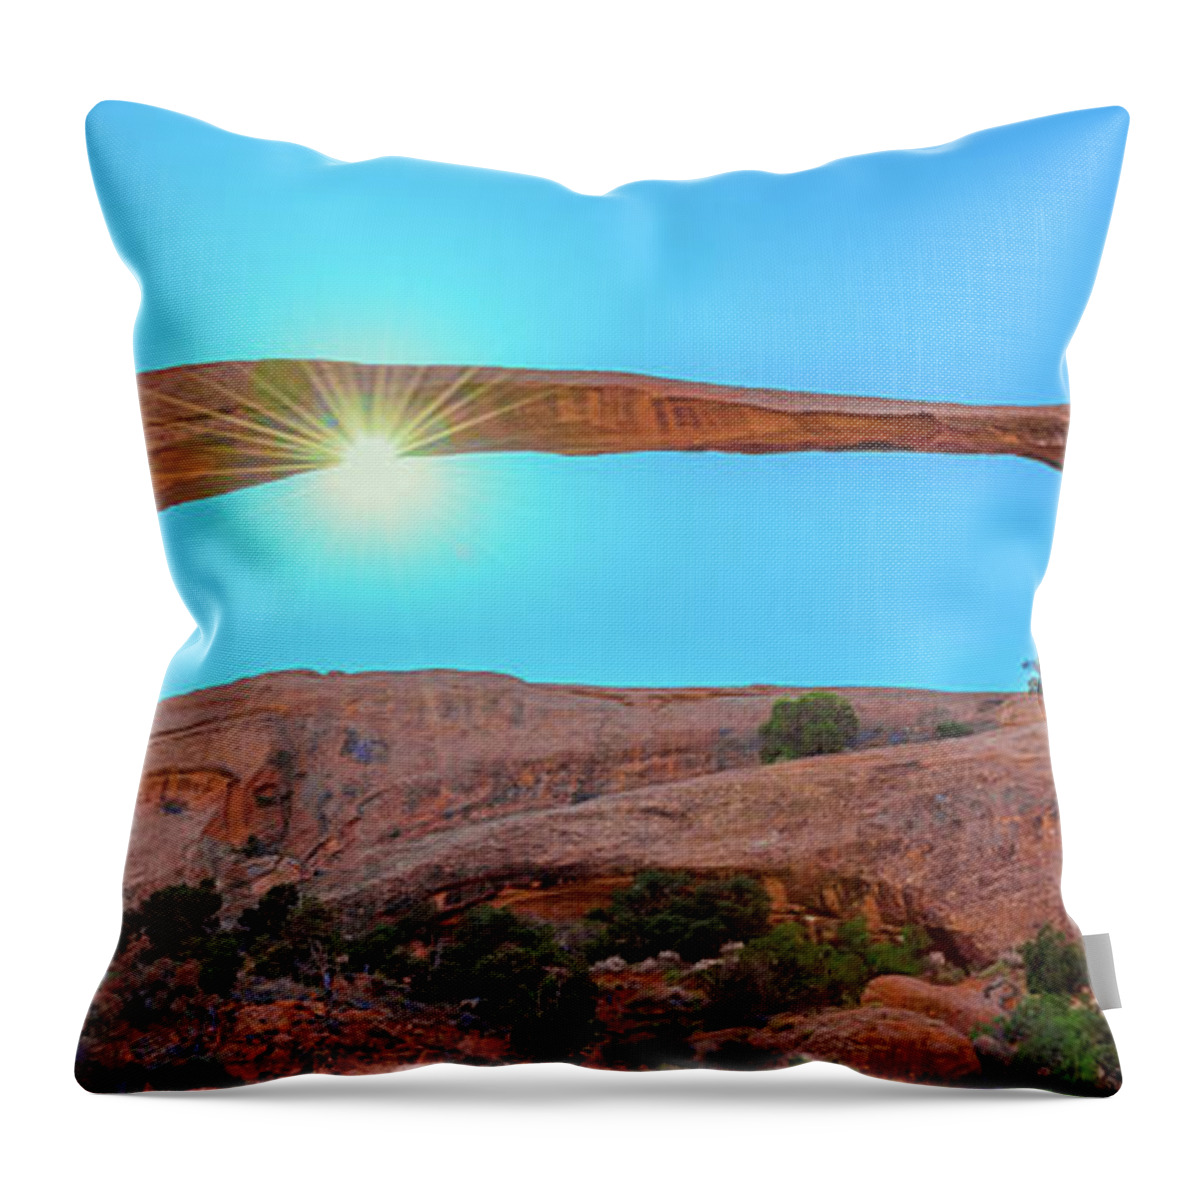 Moab Landscape Arch Throw Pillow featuring the photograph Moab Landscape Arch Sun Star 2.5 to 1 Ratio by Aloha Art